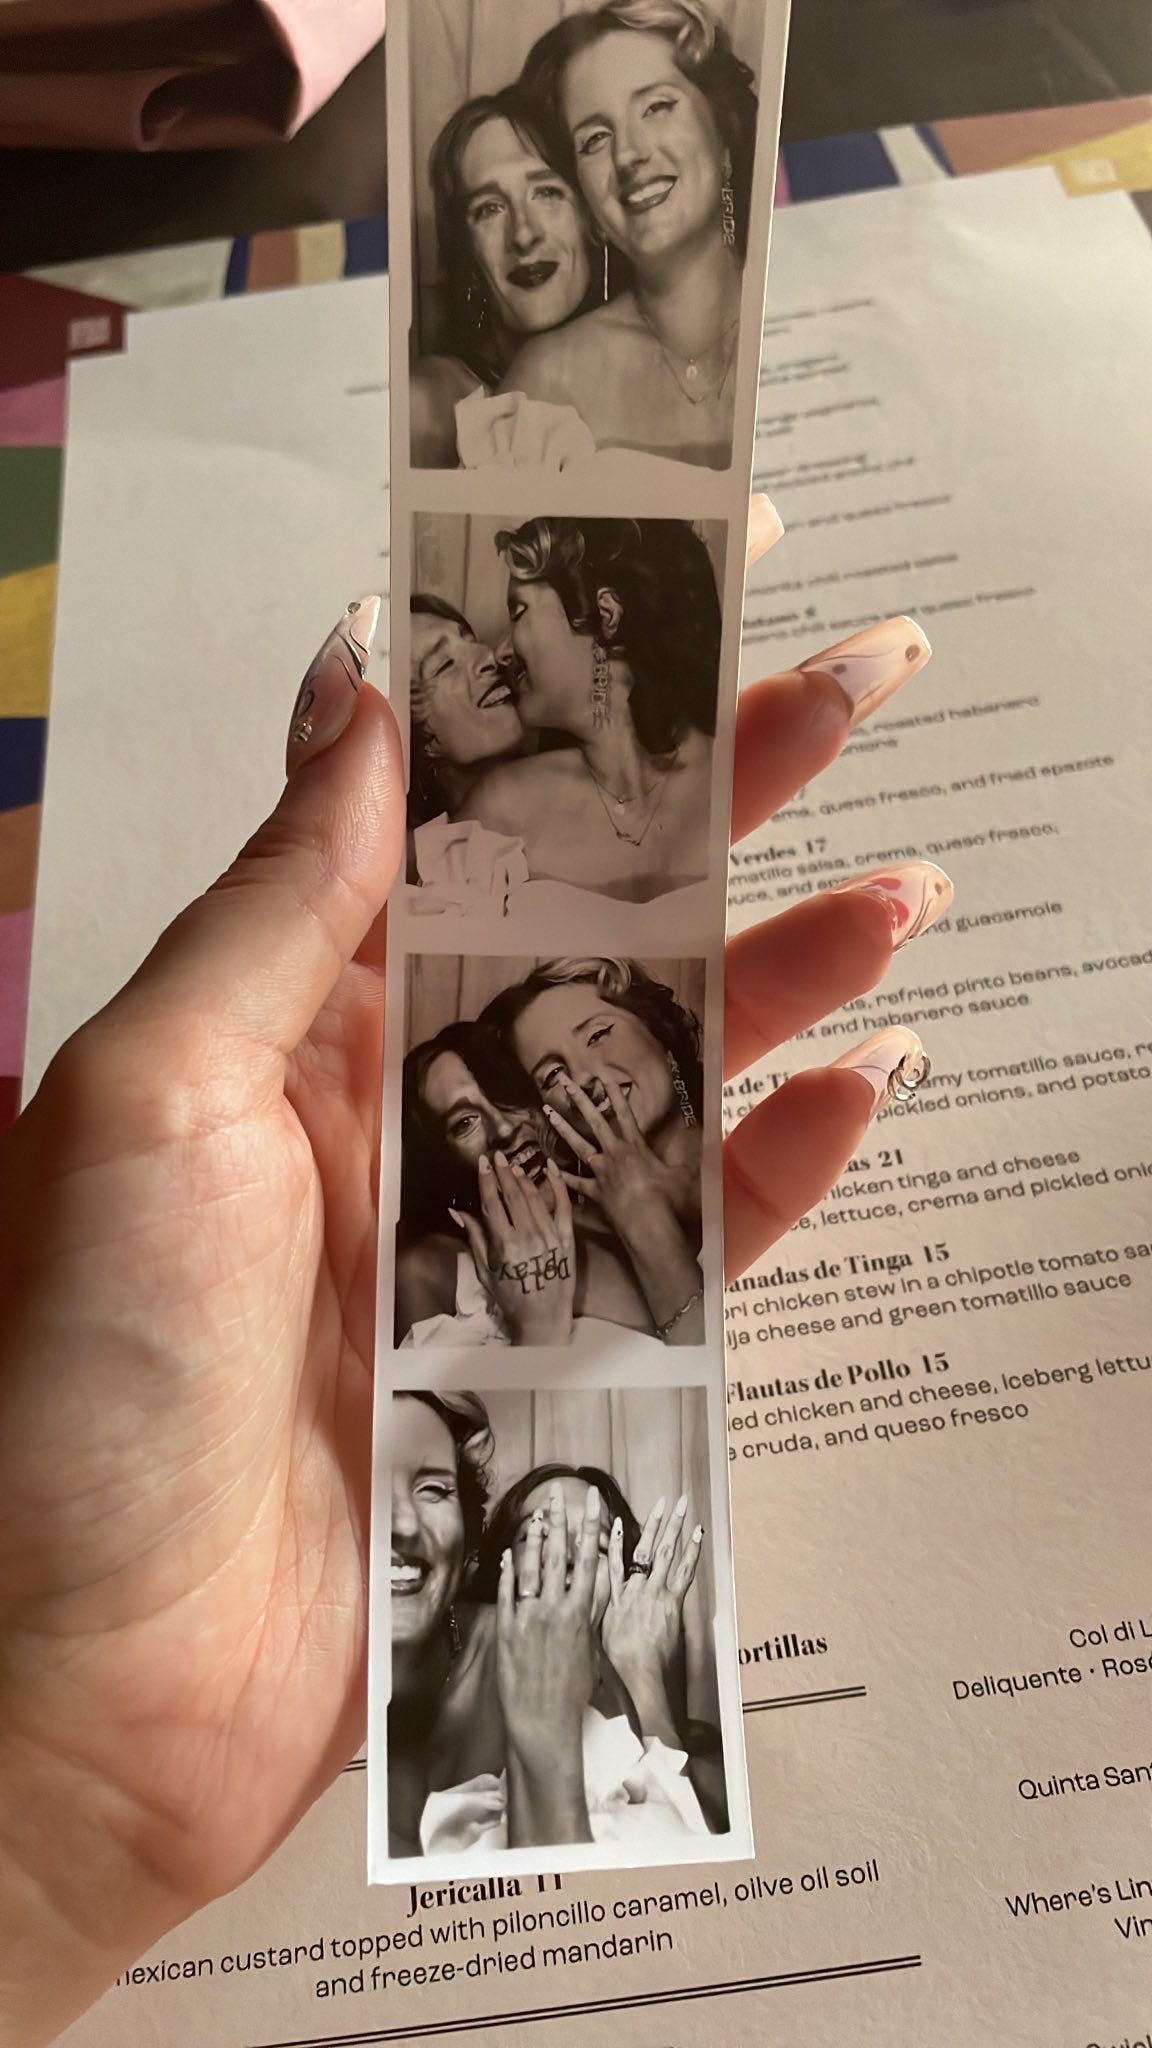 A black and white photostrip of me and Frankie, newly married and showing off our rings